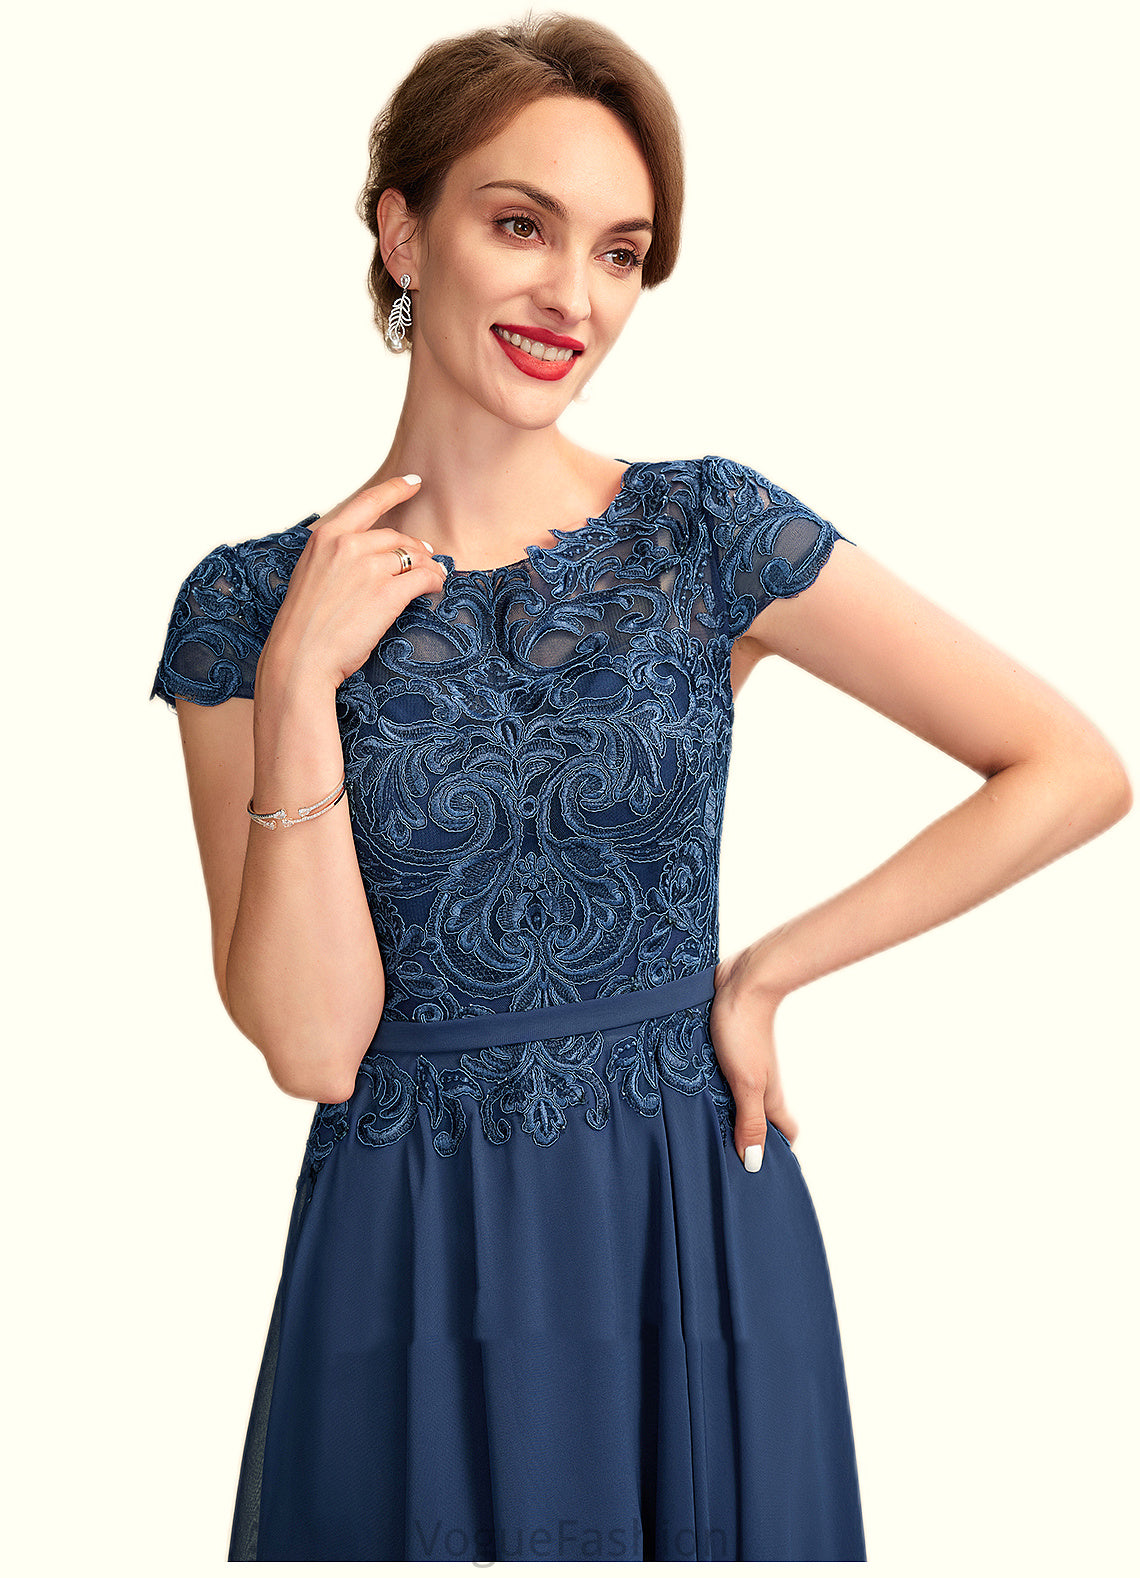 Rayne A-Line Scoop Neck Tea-Length Chiffon Lace Mother of the Bride Dress DK126P0015032